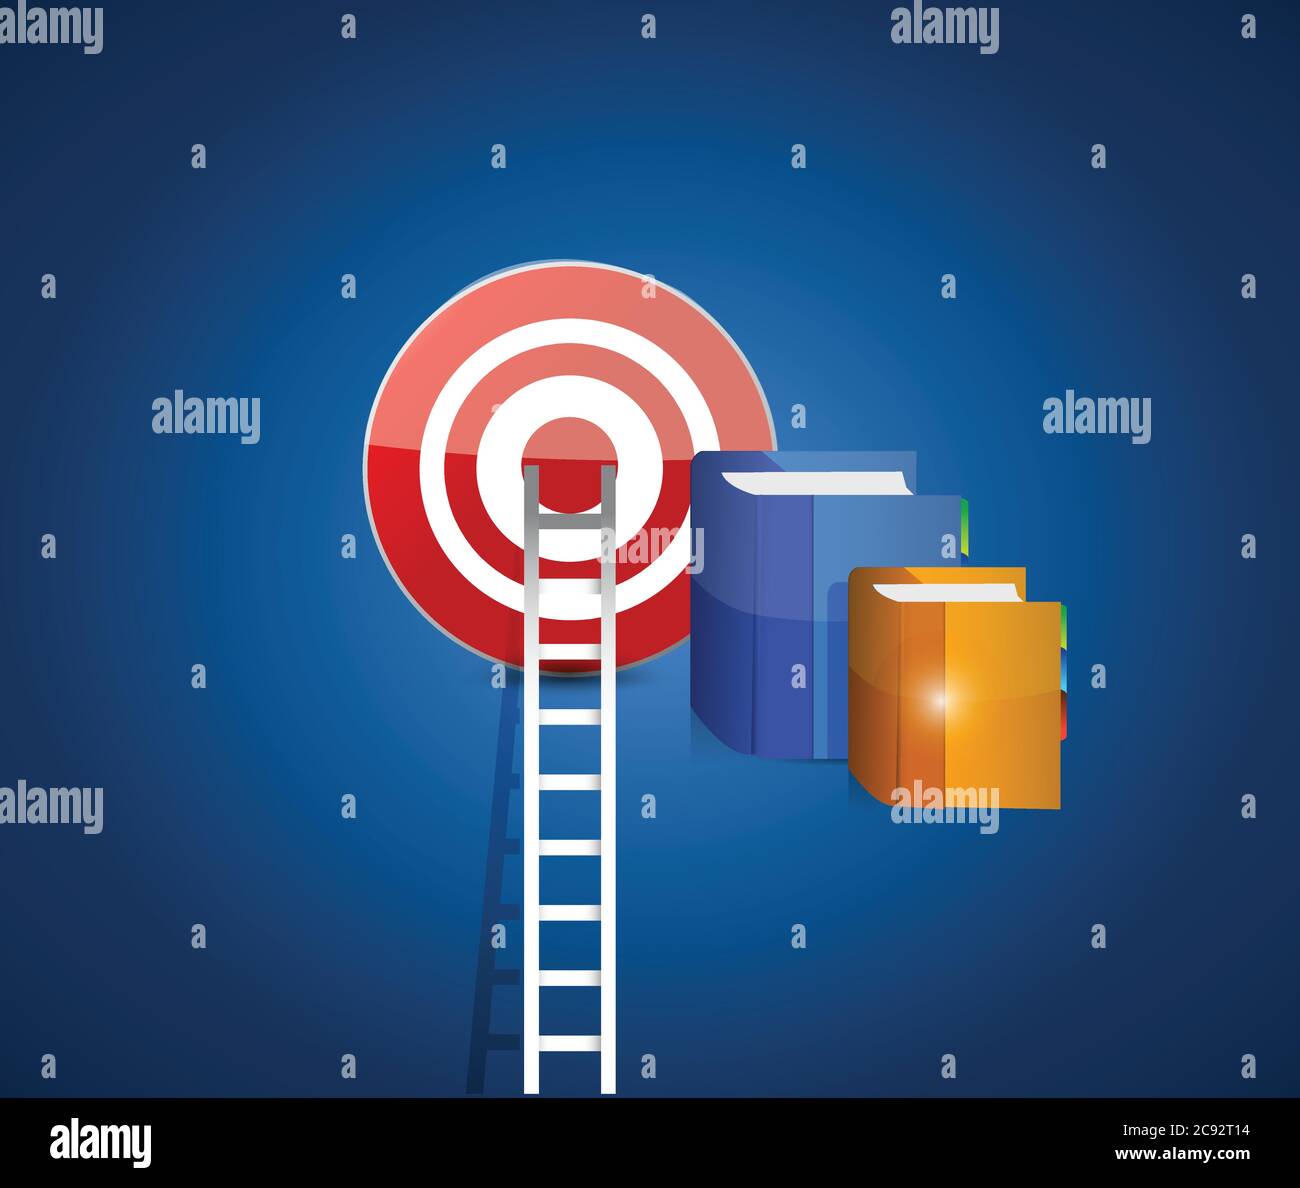 Target stairs and books illustration design over a blue background Stock Vector